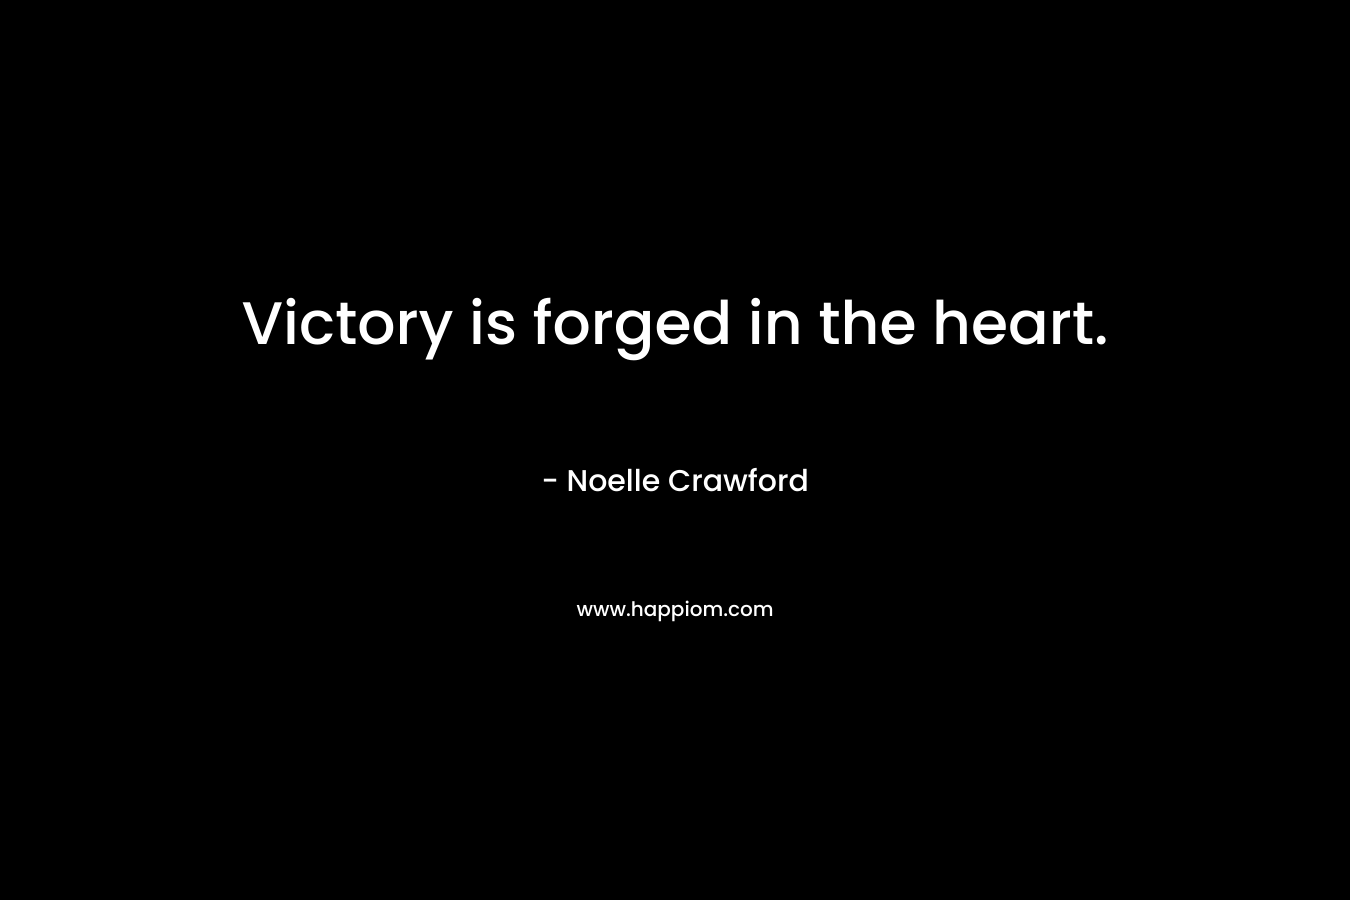 Victory is forged in the heart.